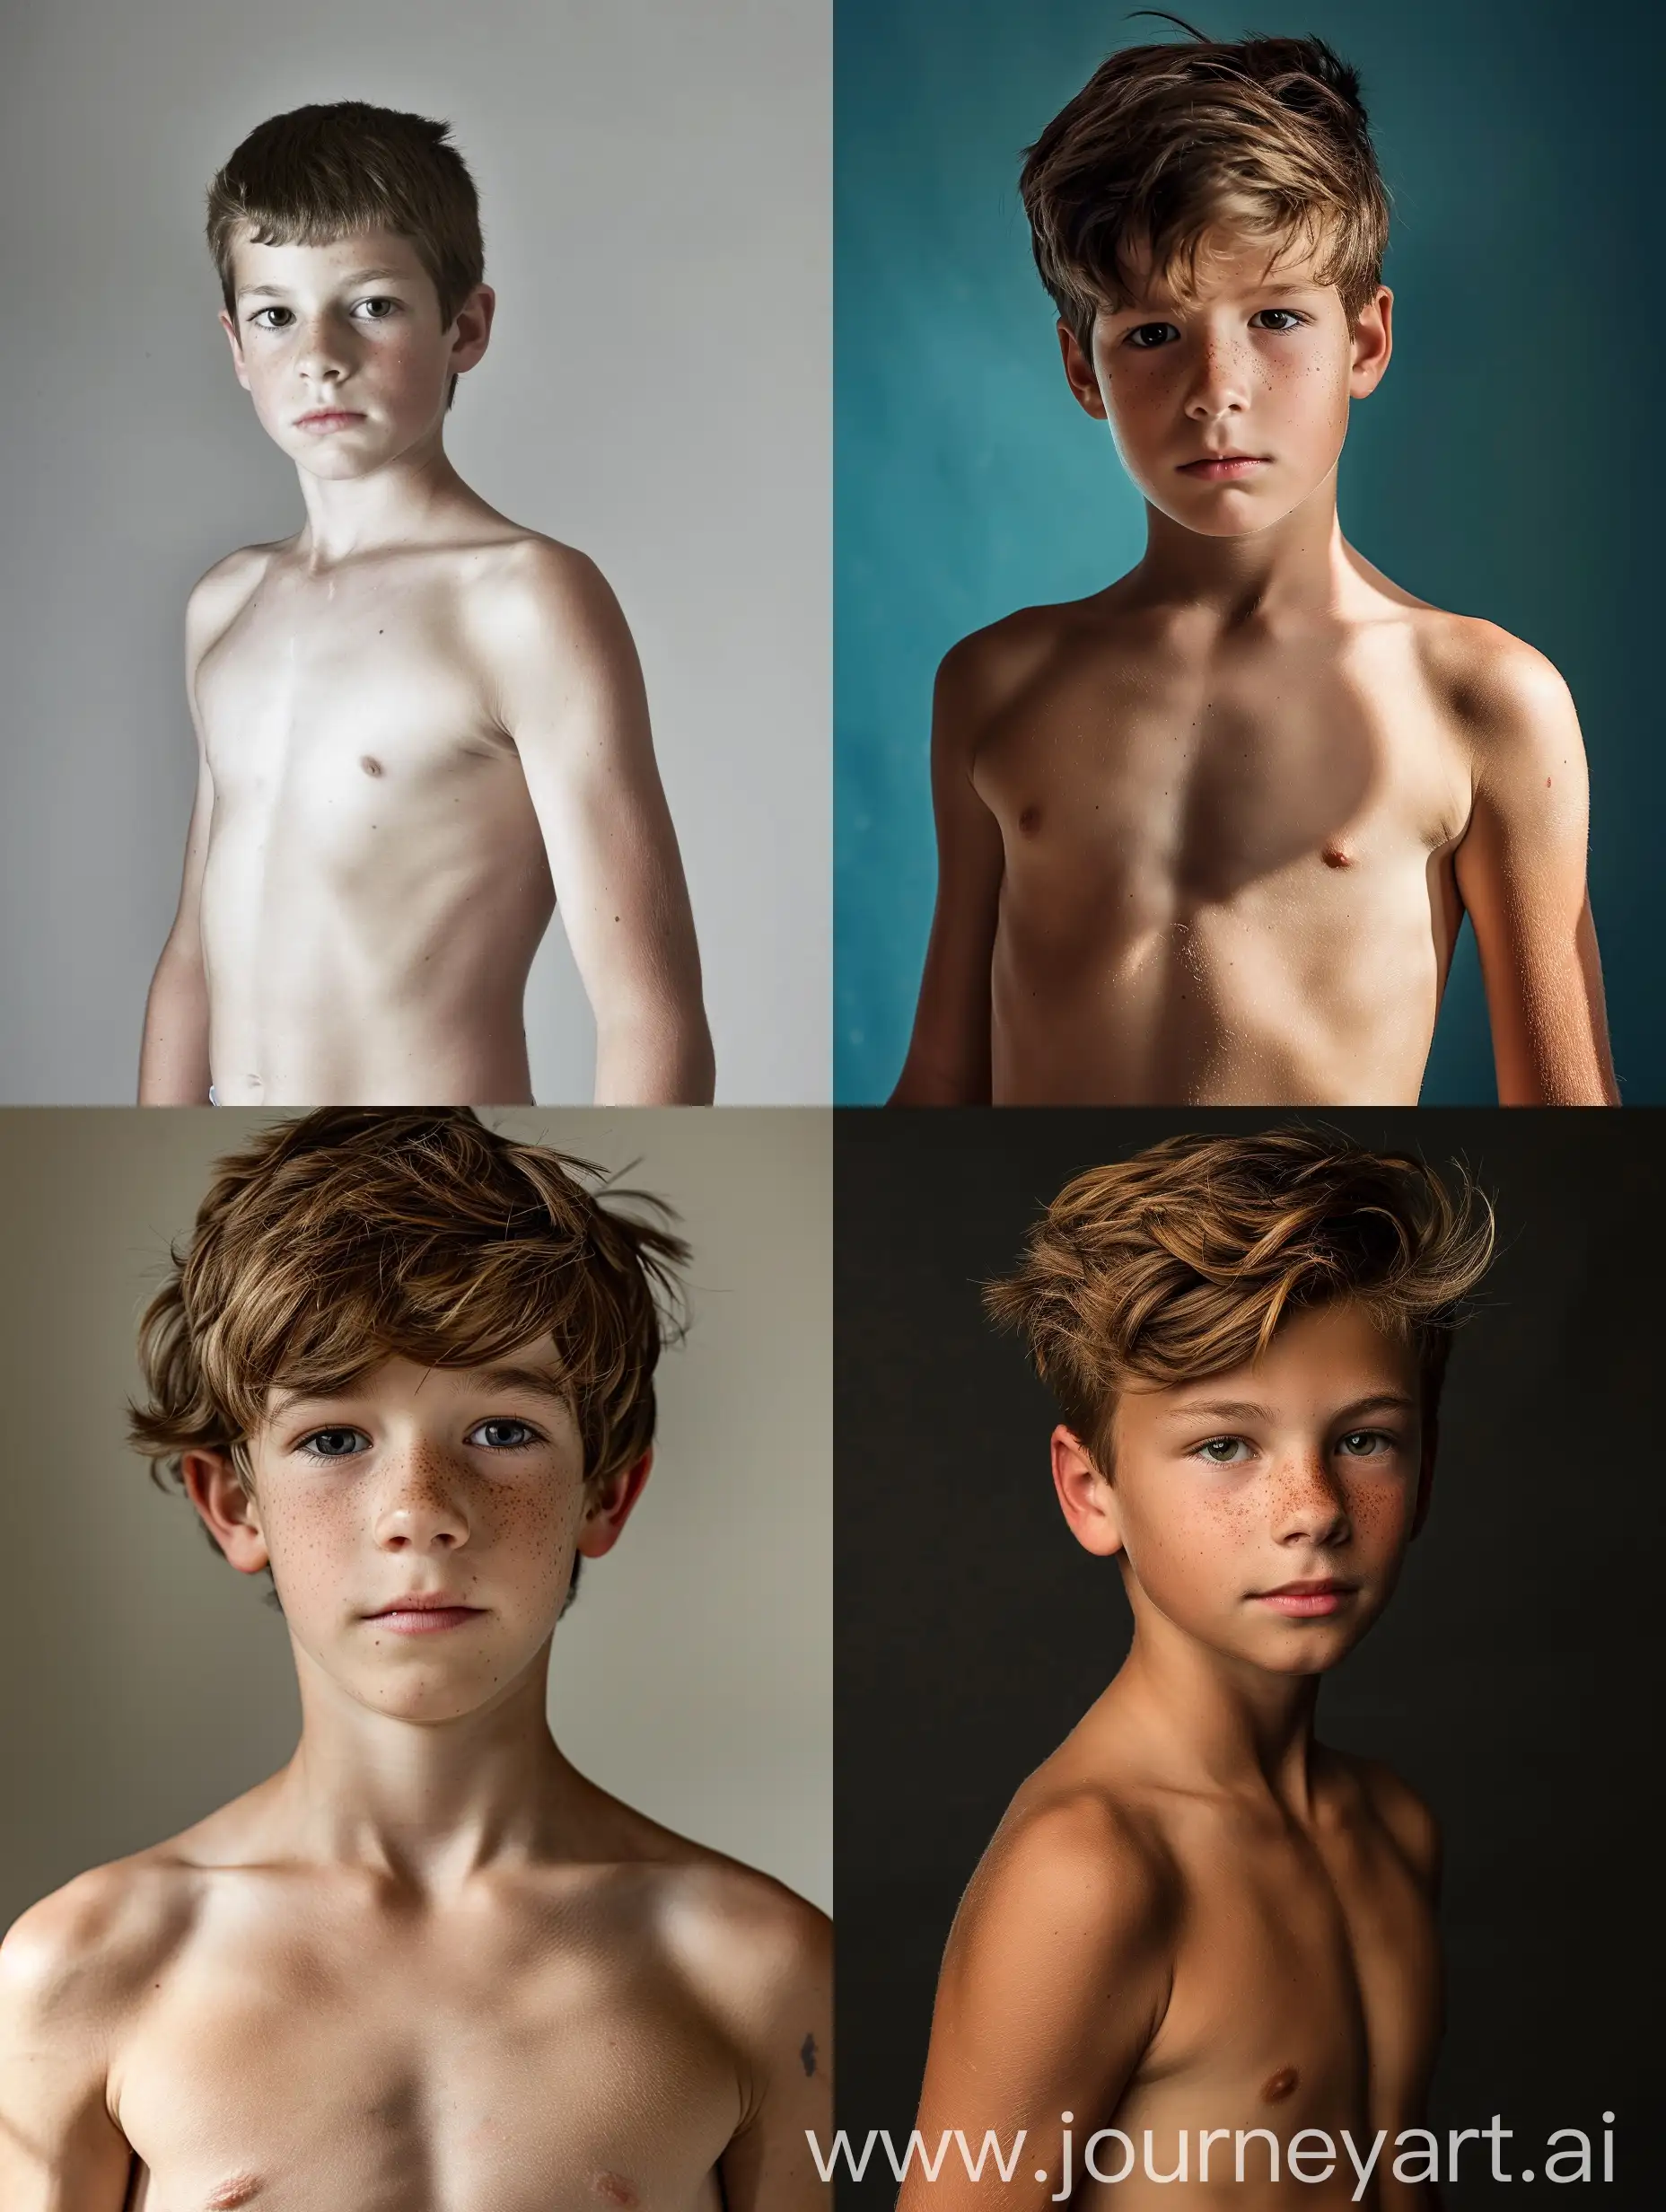 Boy age 15 with sixpack